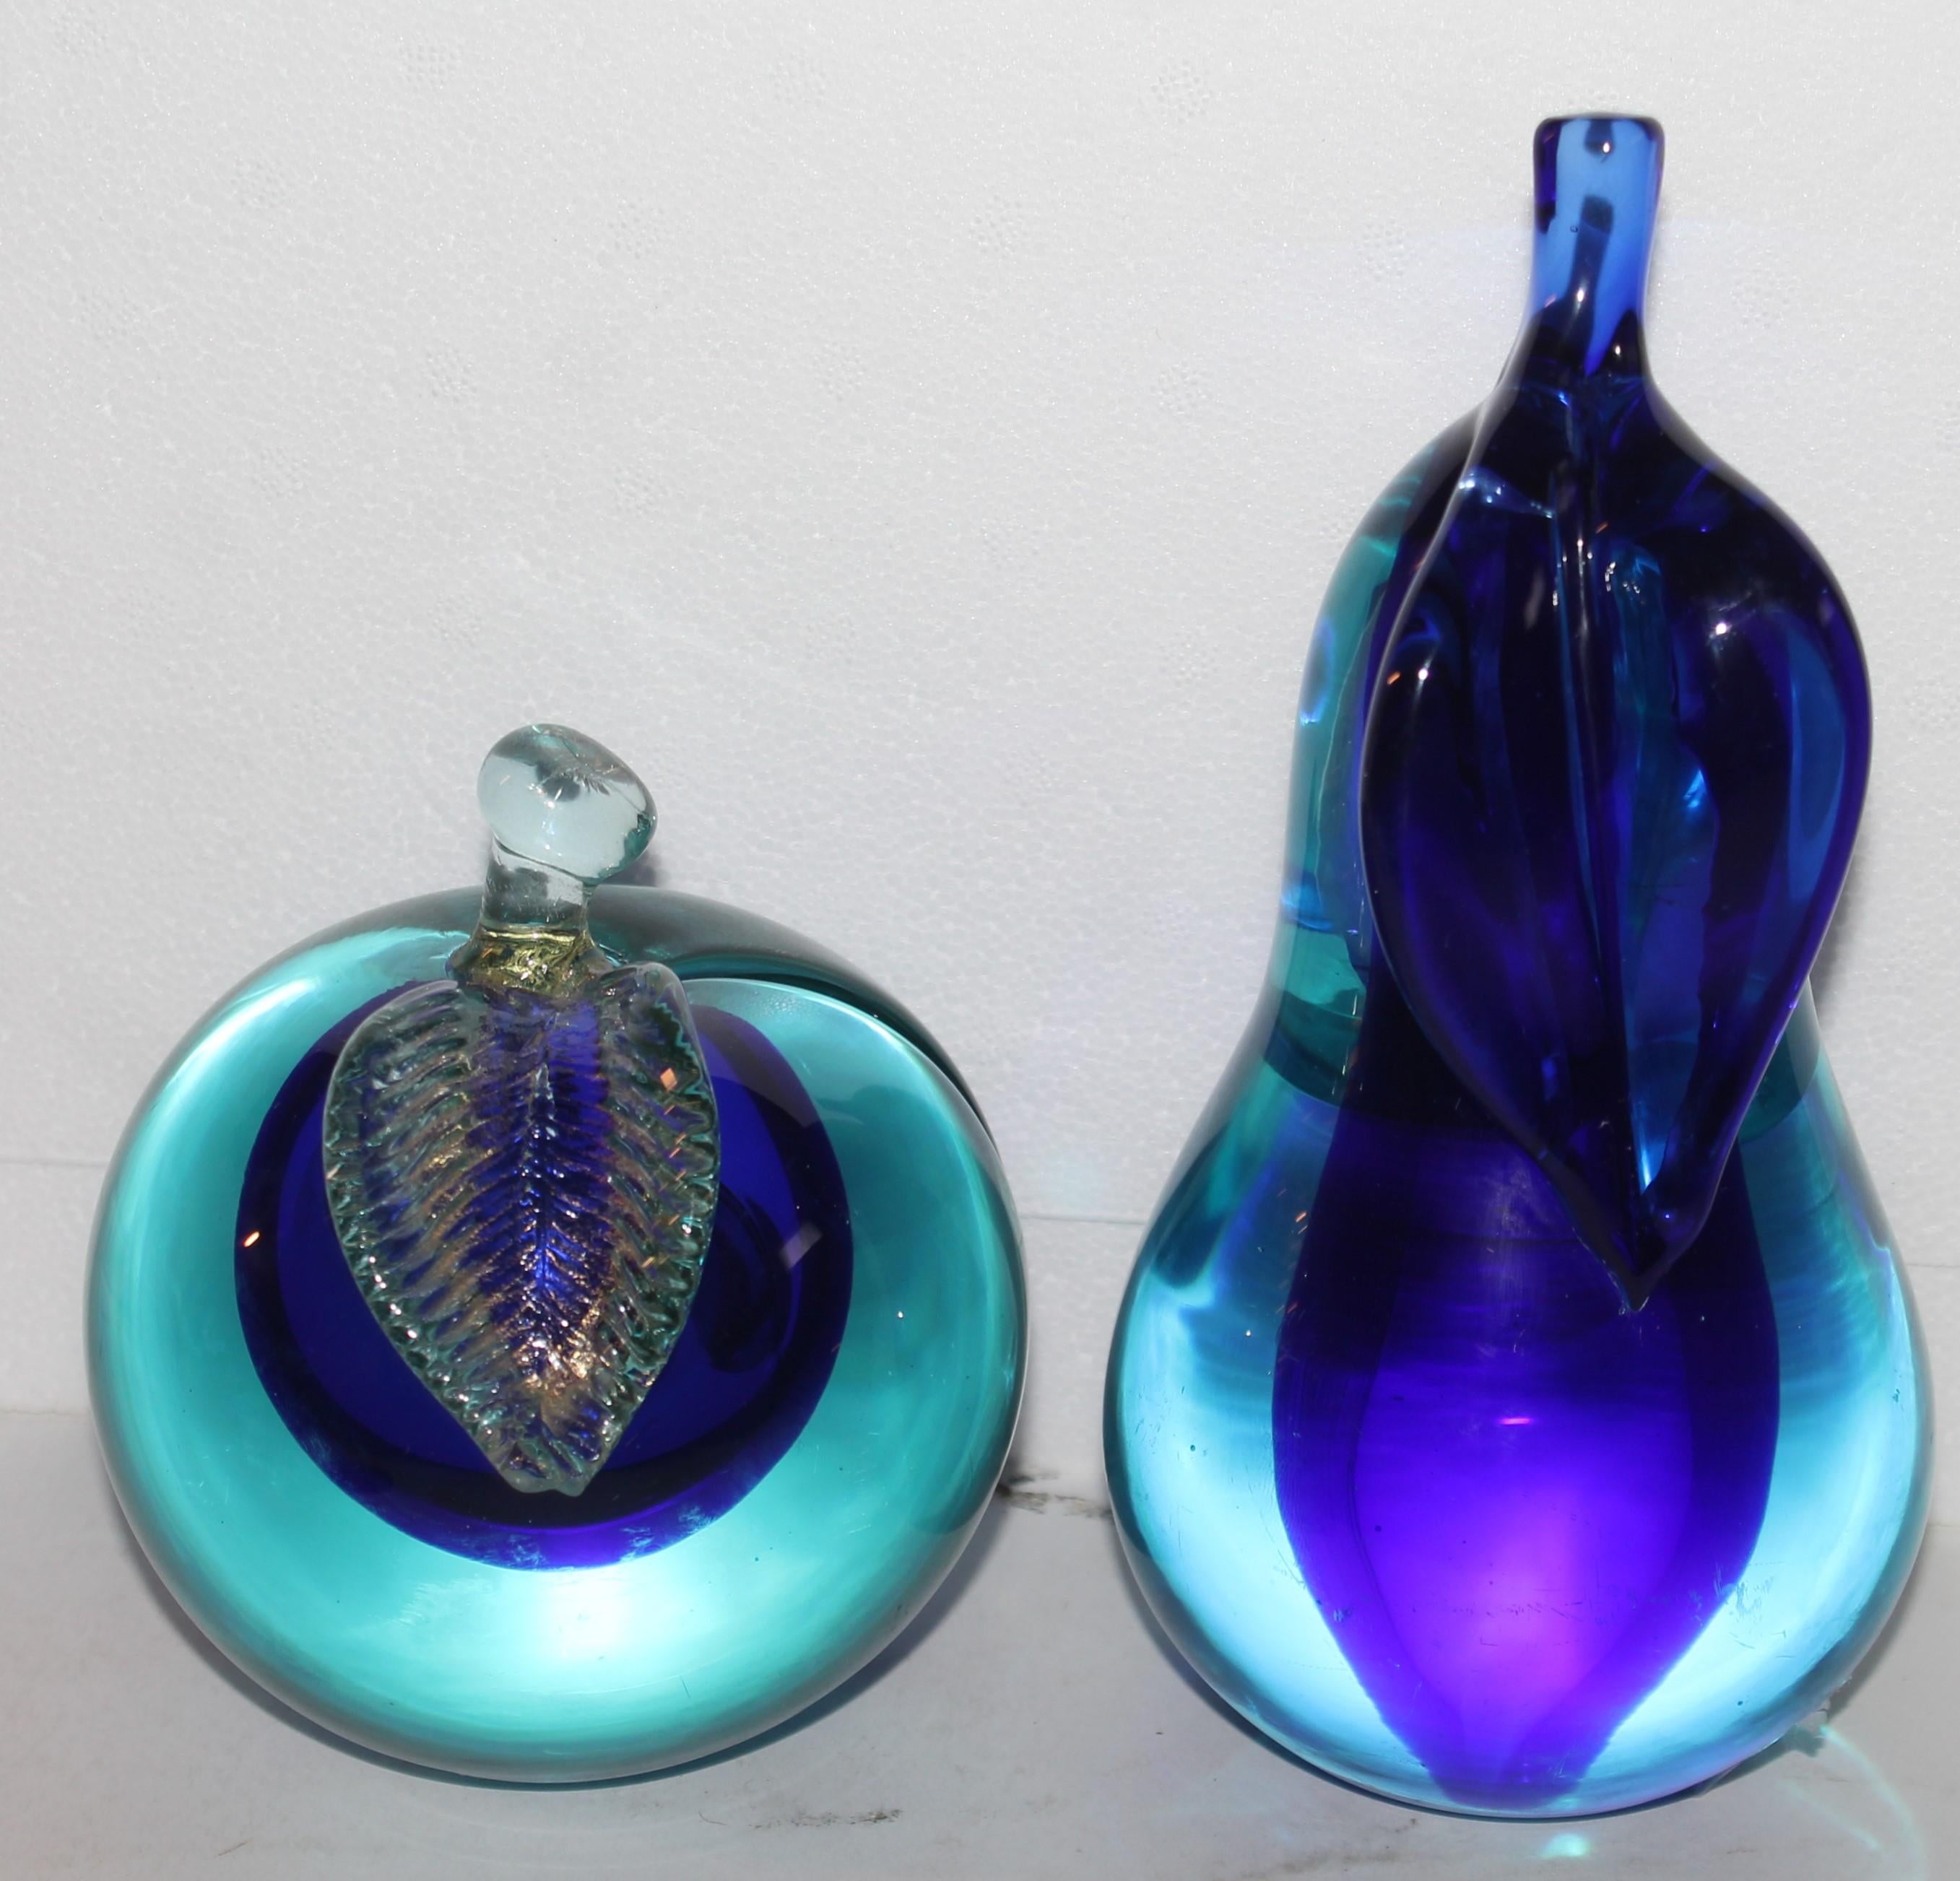 These hand made glass apple & pear bookends in fine condition. The deep blue & clear color. Pear is 6'high and the apple is 4